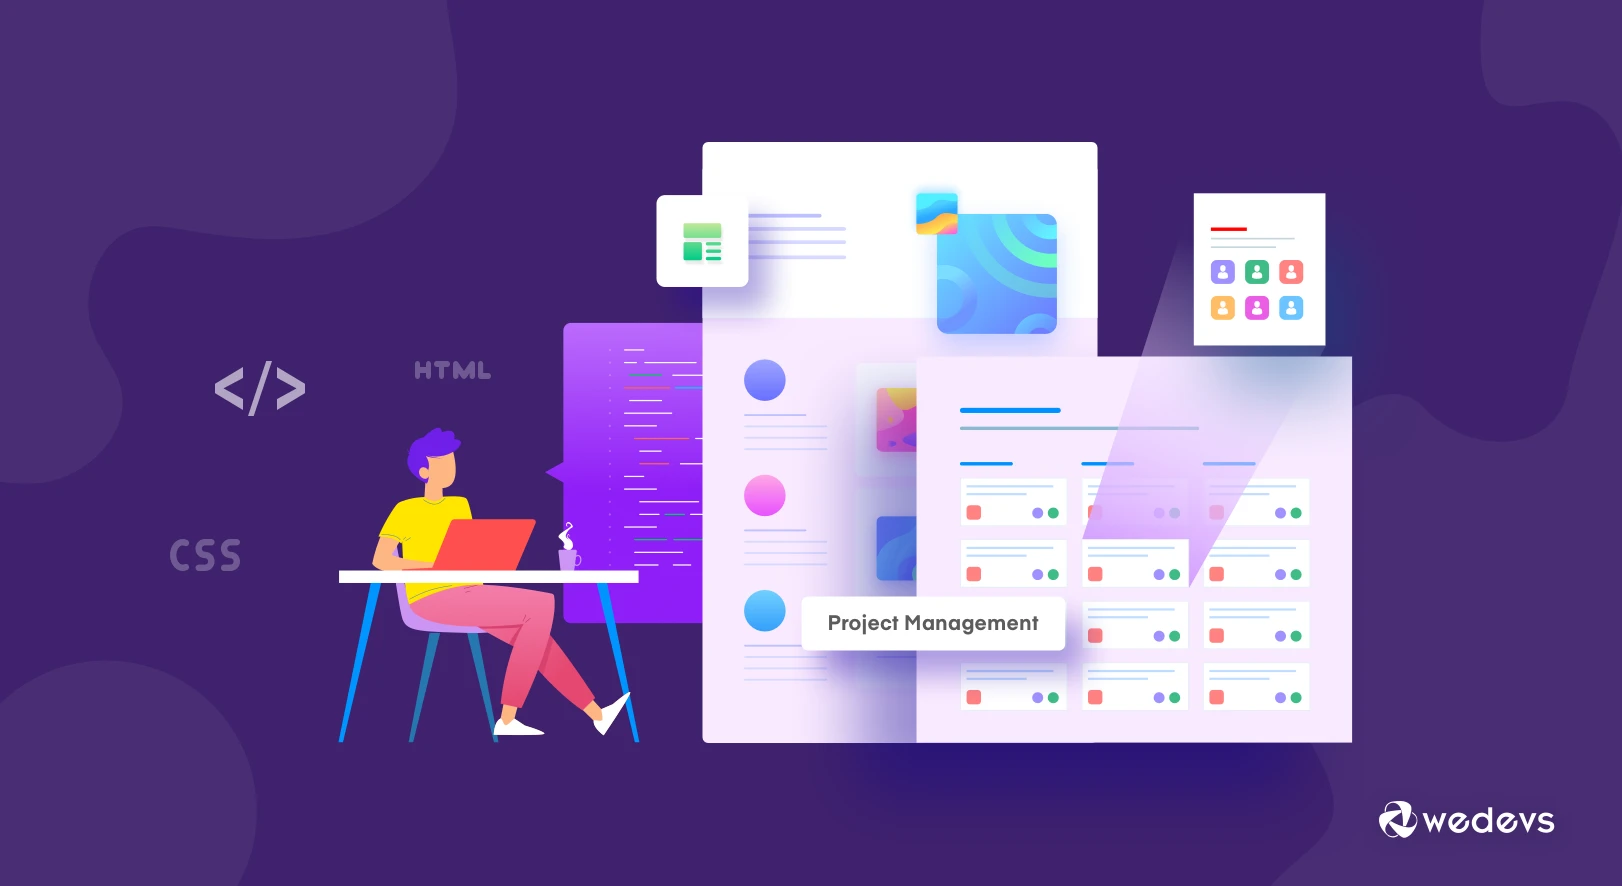 7+ Best Project Management Software for Web Designers to Increase Productivity